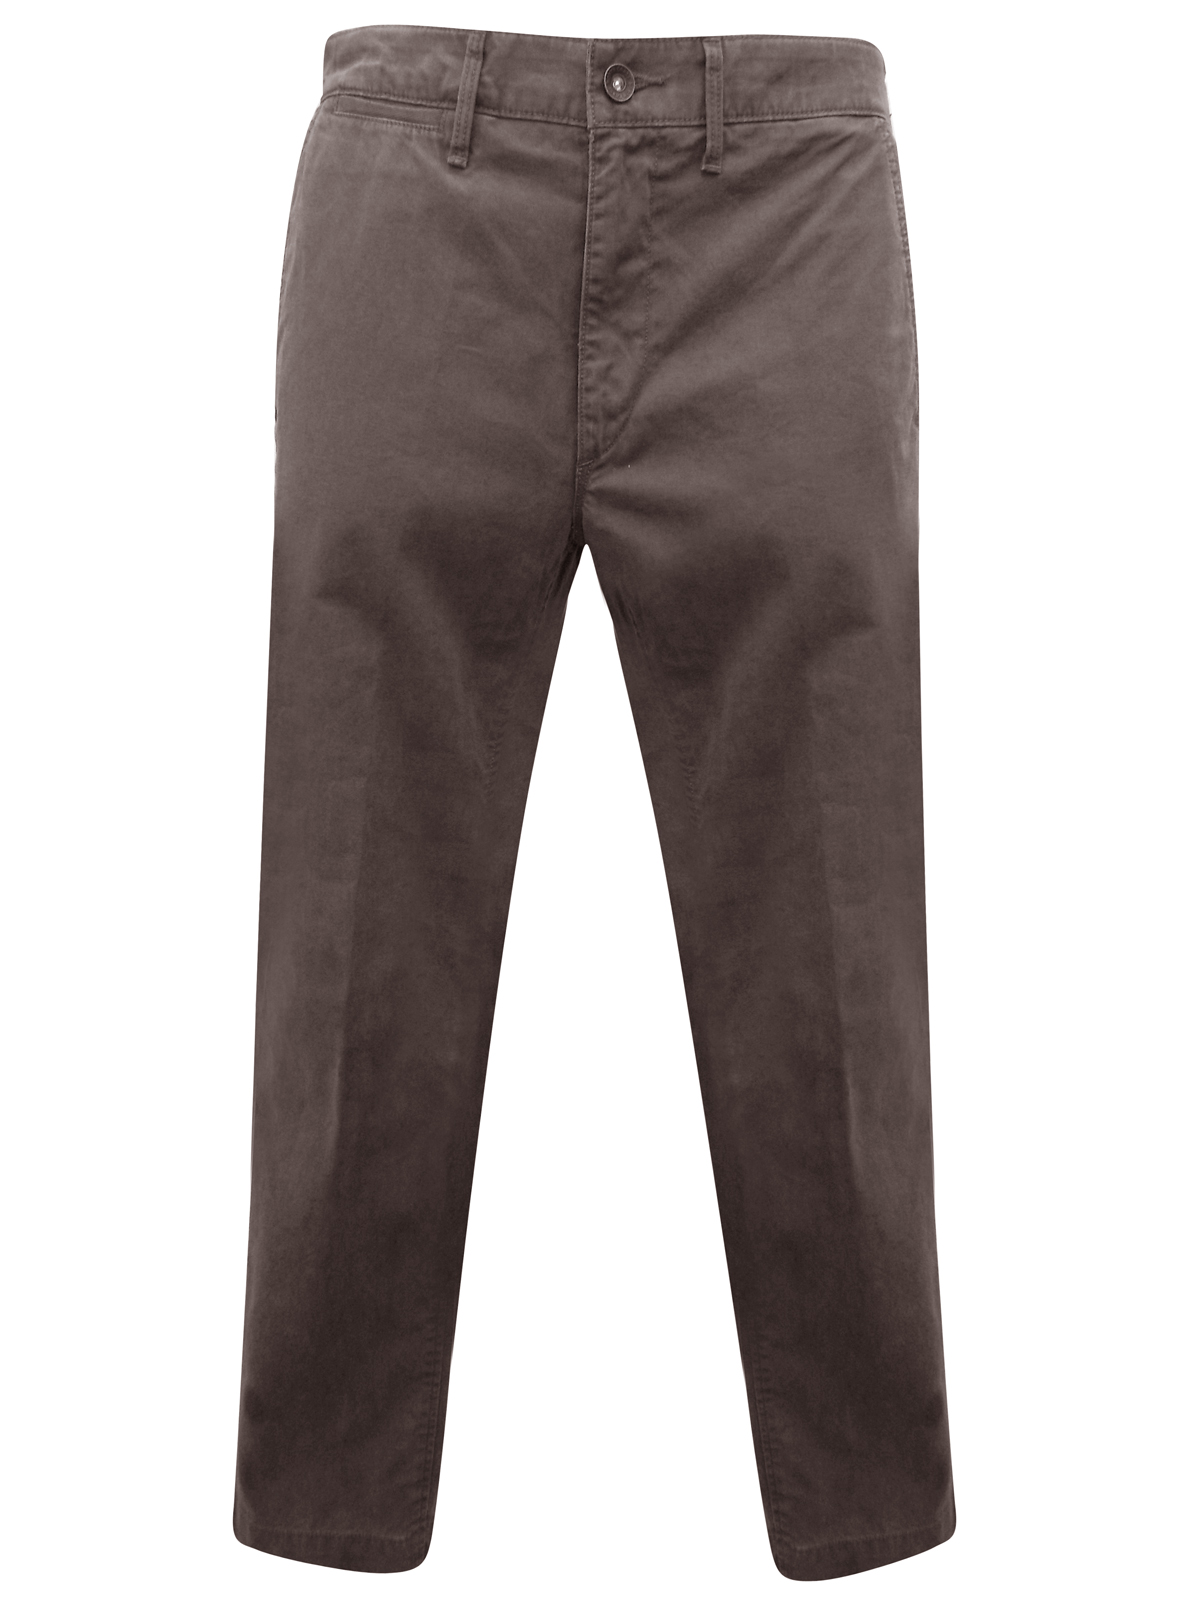 Marks and Spencer - - M&5 TOBACCO Pure Cotton Straight Leg Trousers ...